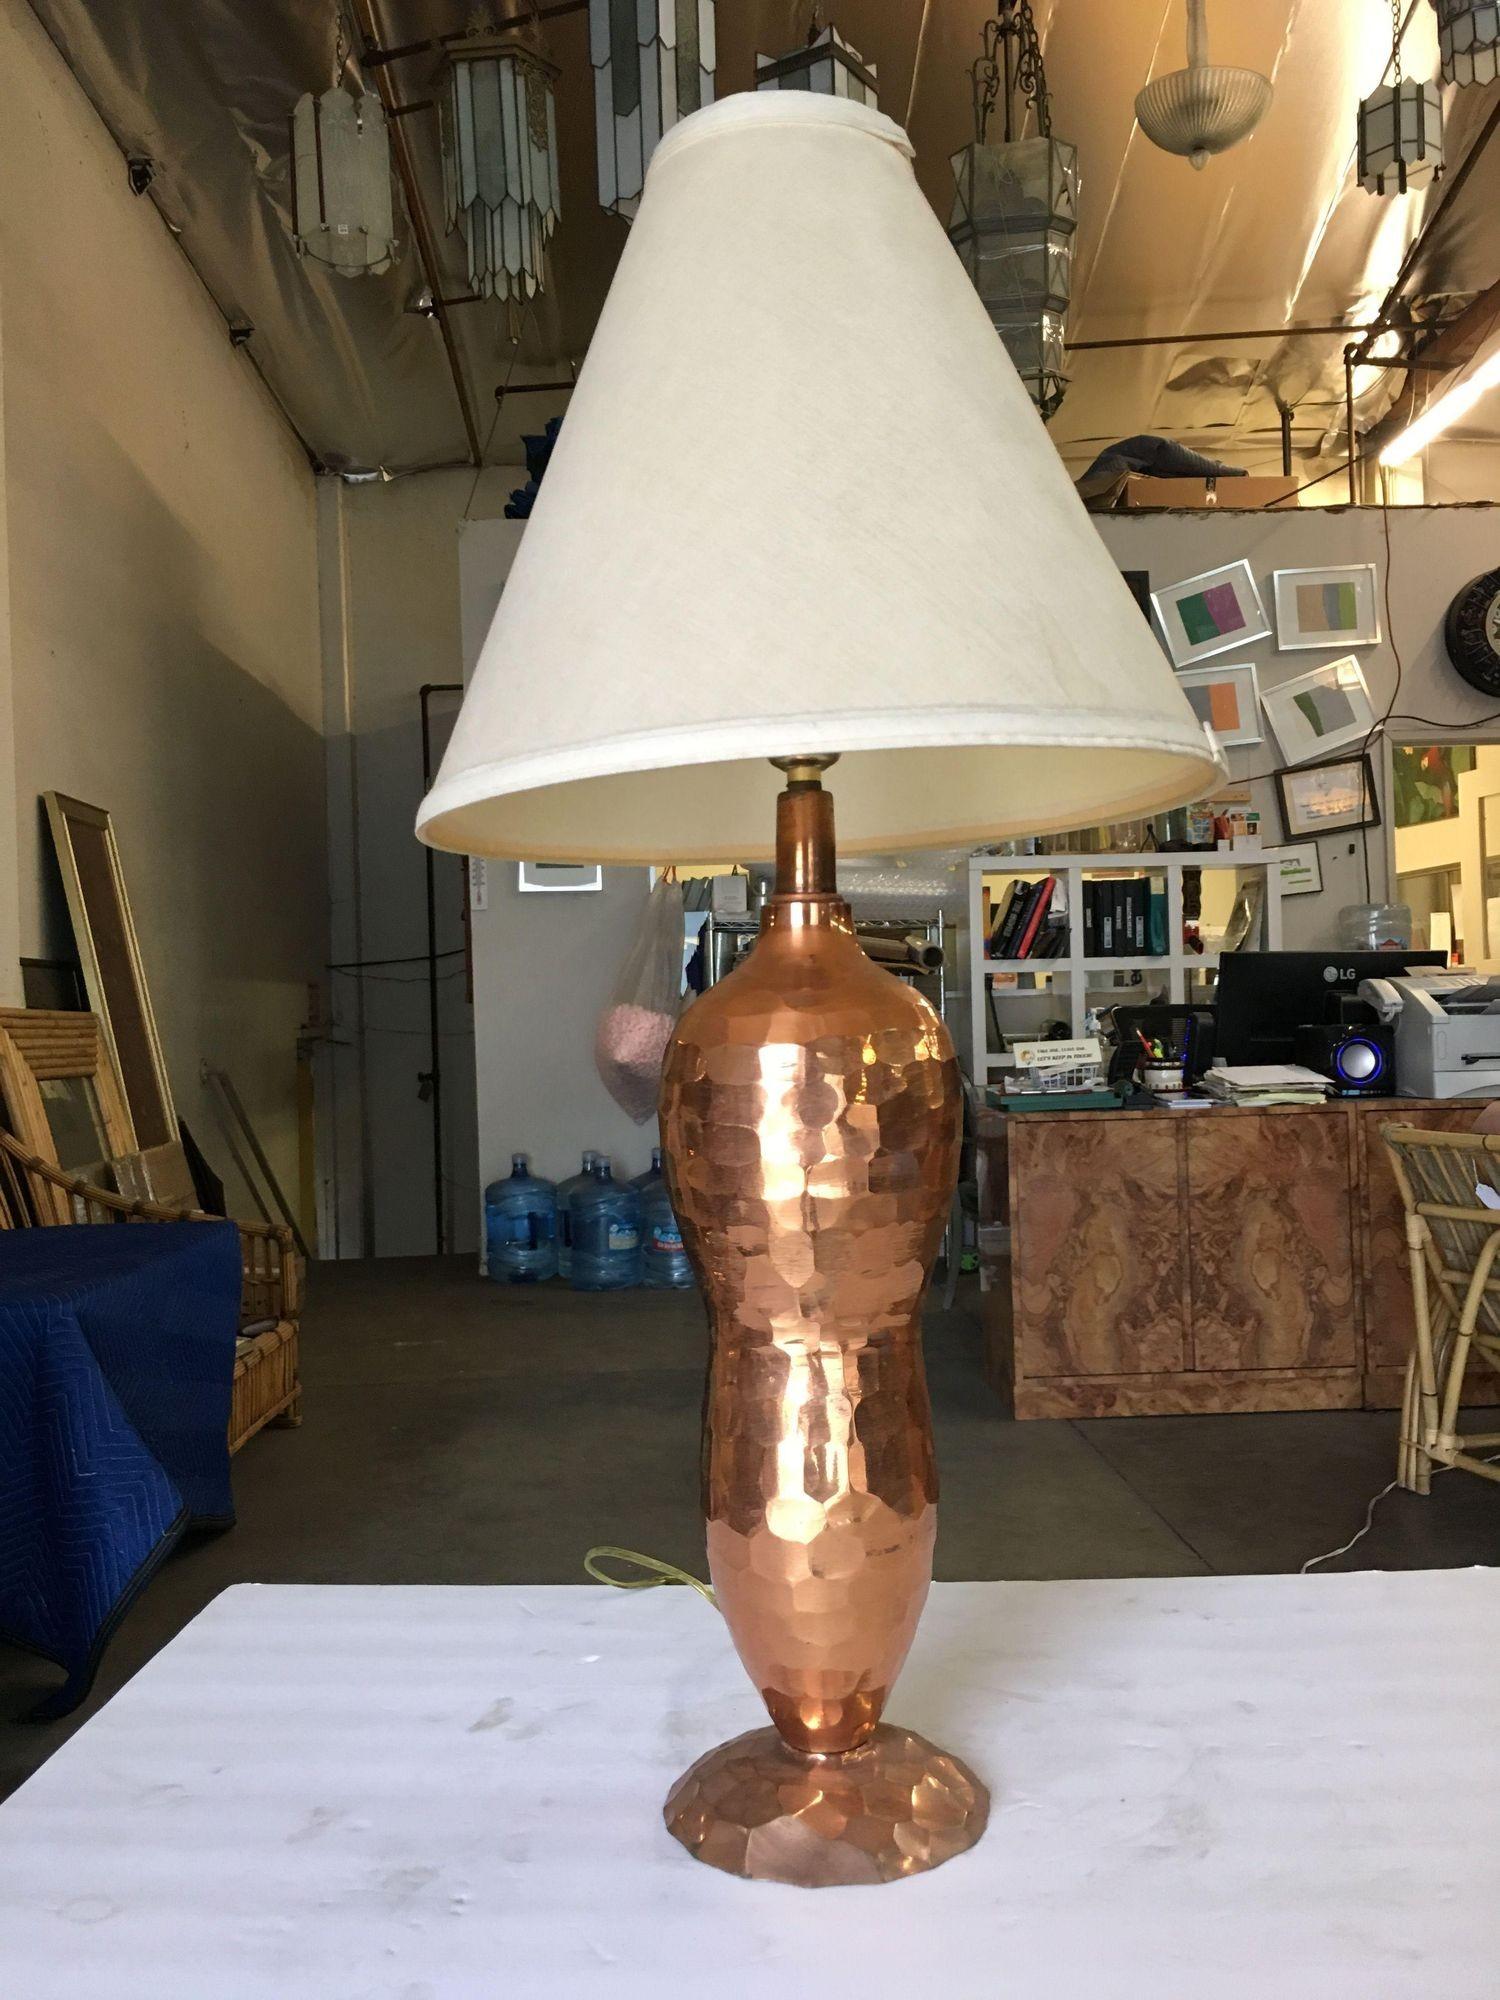 Mission Inspired Hand-Hammered Peanut Shaped Copper Lamp, Pair In Excellent Condition For Sale In Van Nuys, CA